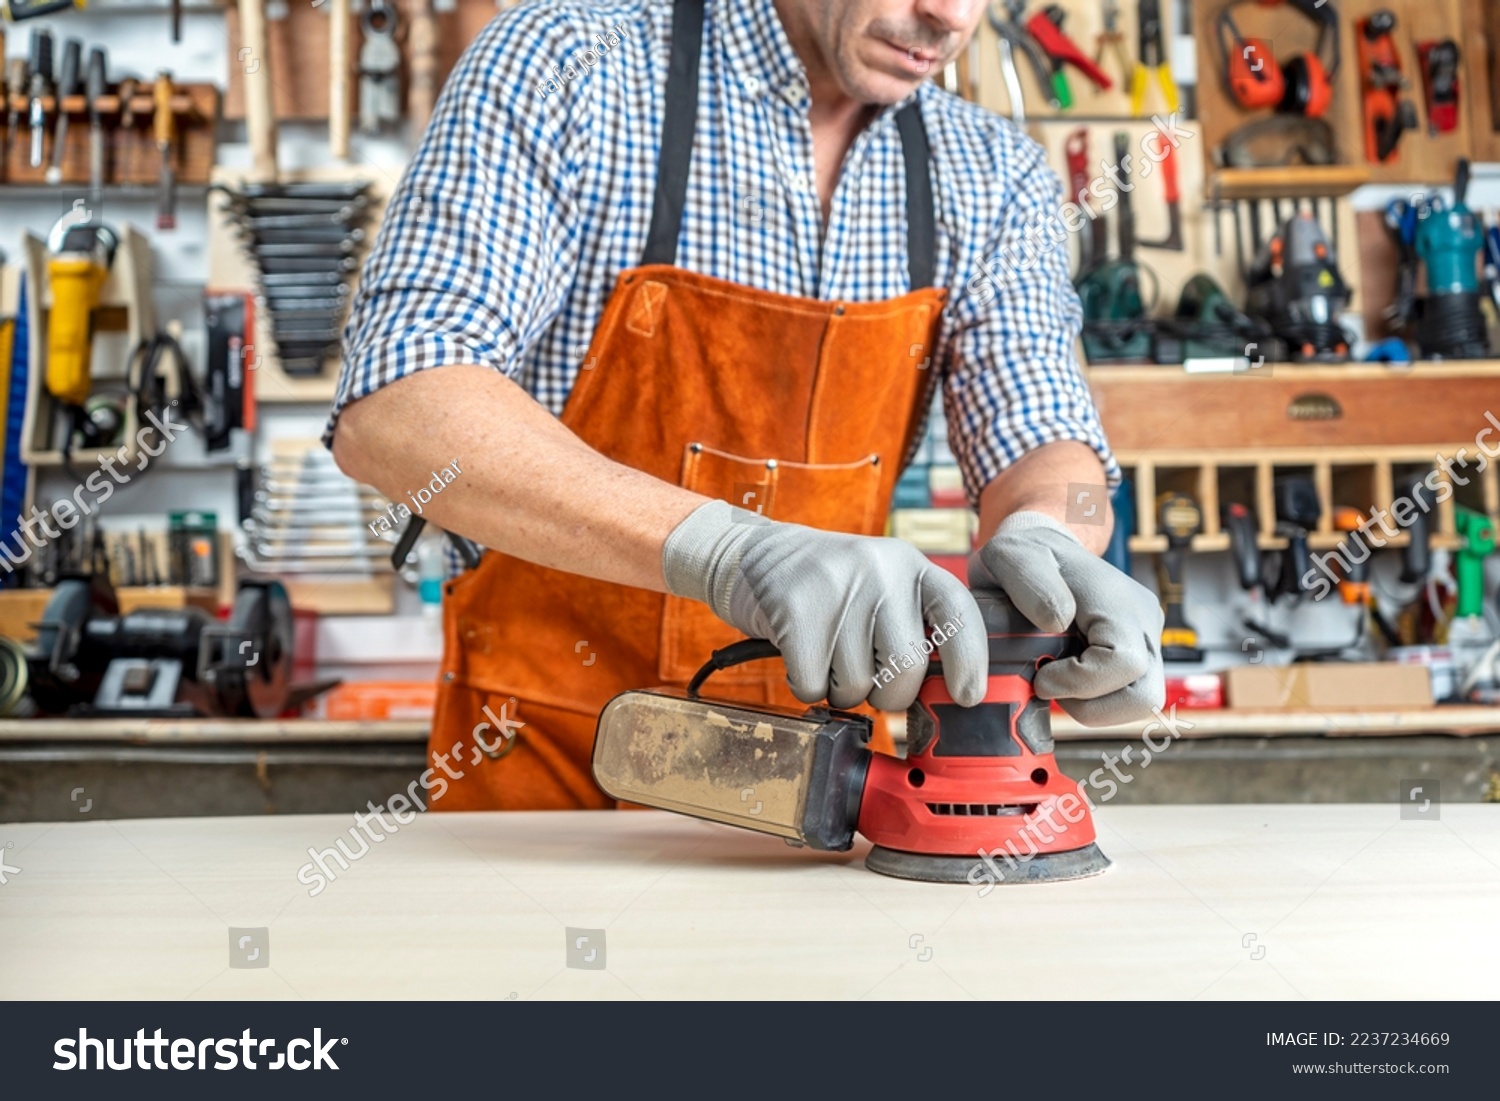 CARPENTER IN WORKSHOP WORKING WOOD WITH AN ORBITAL SANDER. SMALL BUSINESSES AND SELF EMPLOYED. DIY CONCEPT. #2237234669